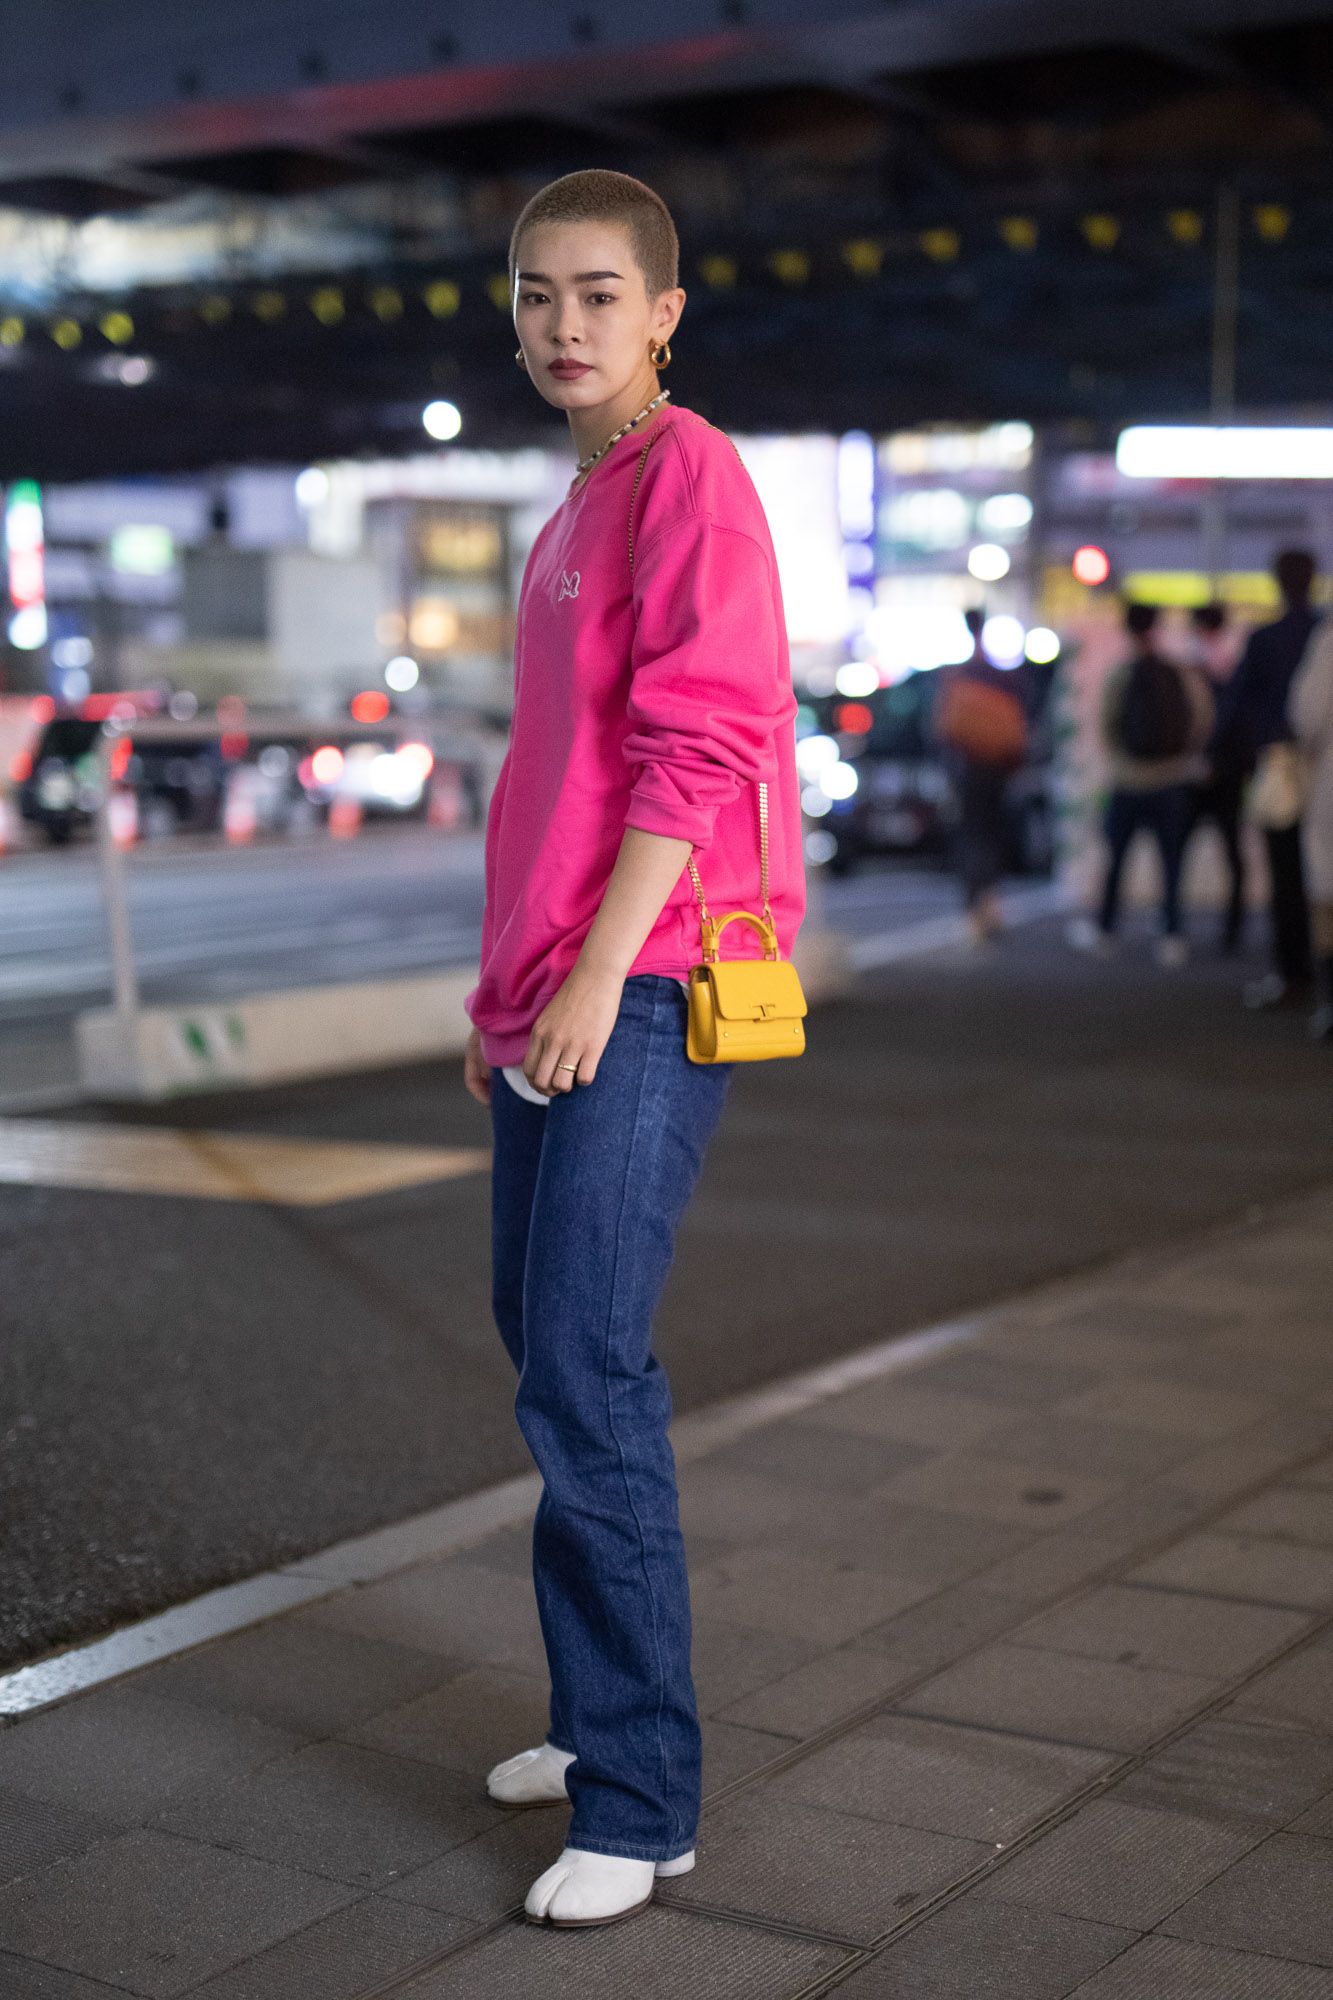 14 Popular Tokyo Fashion Trends for Girls  Find Japan Blog powered by  SUPER DELIVERY